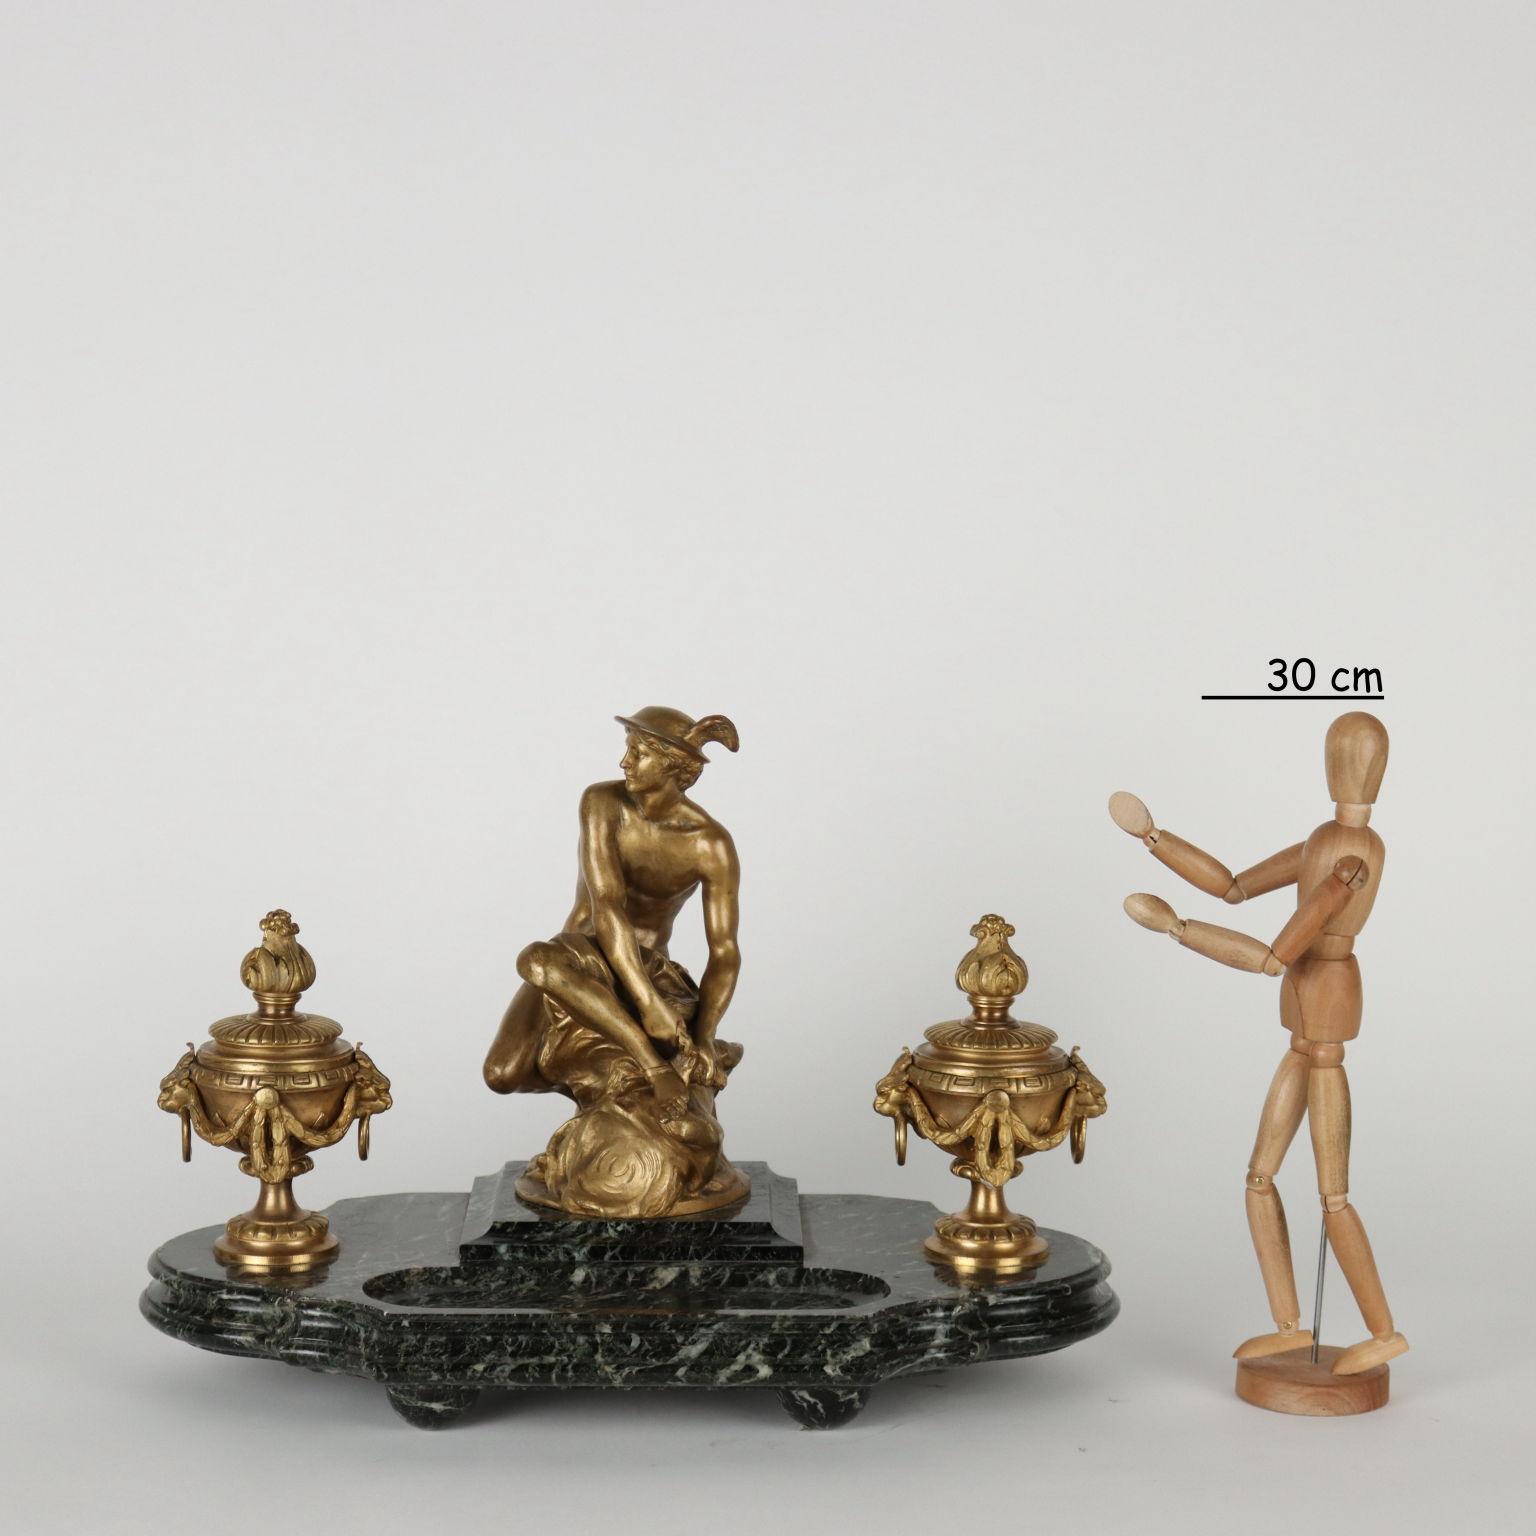 Inkwell with large base in green serpentine marble surmounted by two cup-shaped vases with lids and lion handles with the function of inkwells. In the center, a statue of Mercury with the author's engraved signature. The bronzes are gilded and have